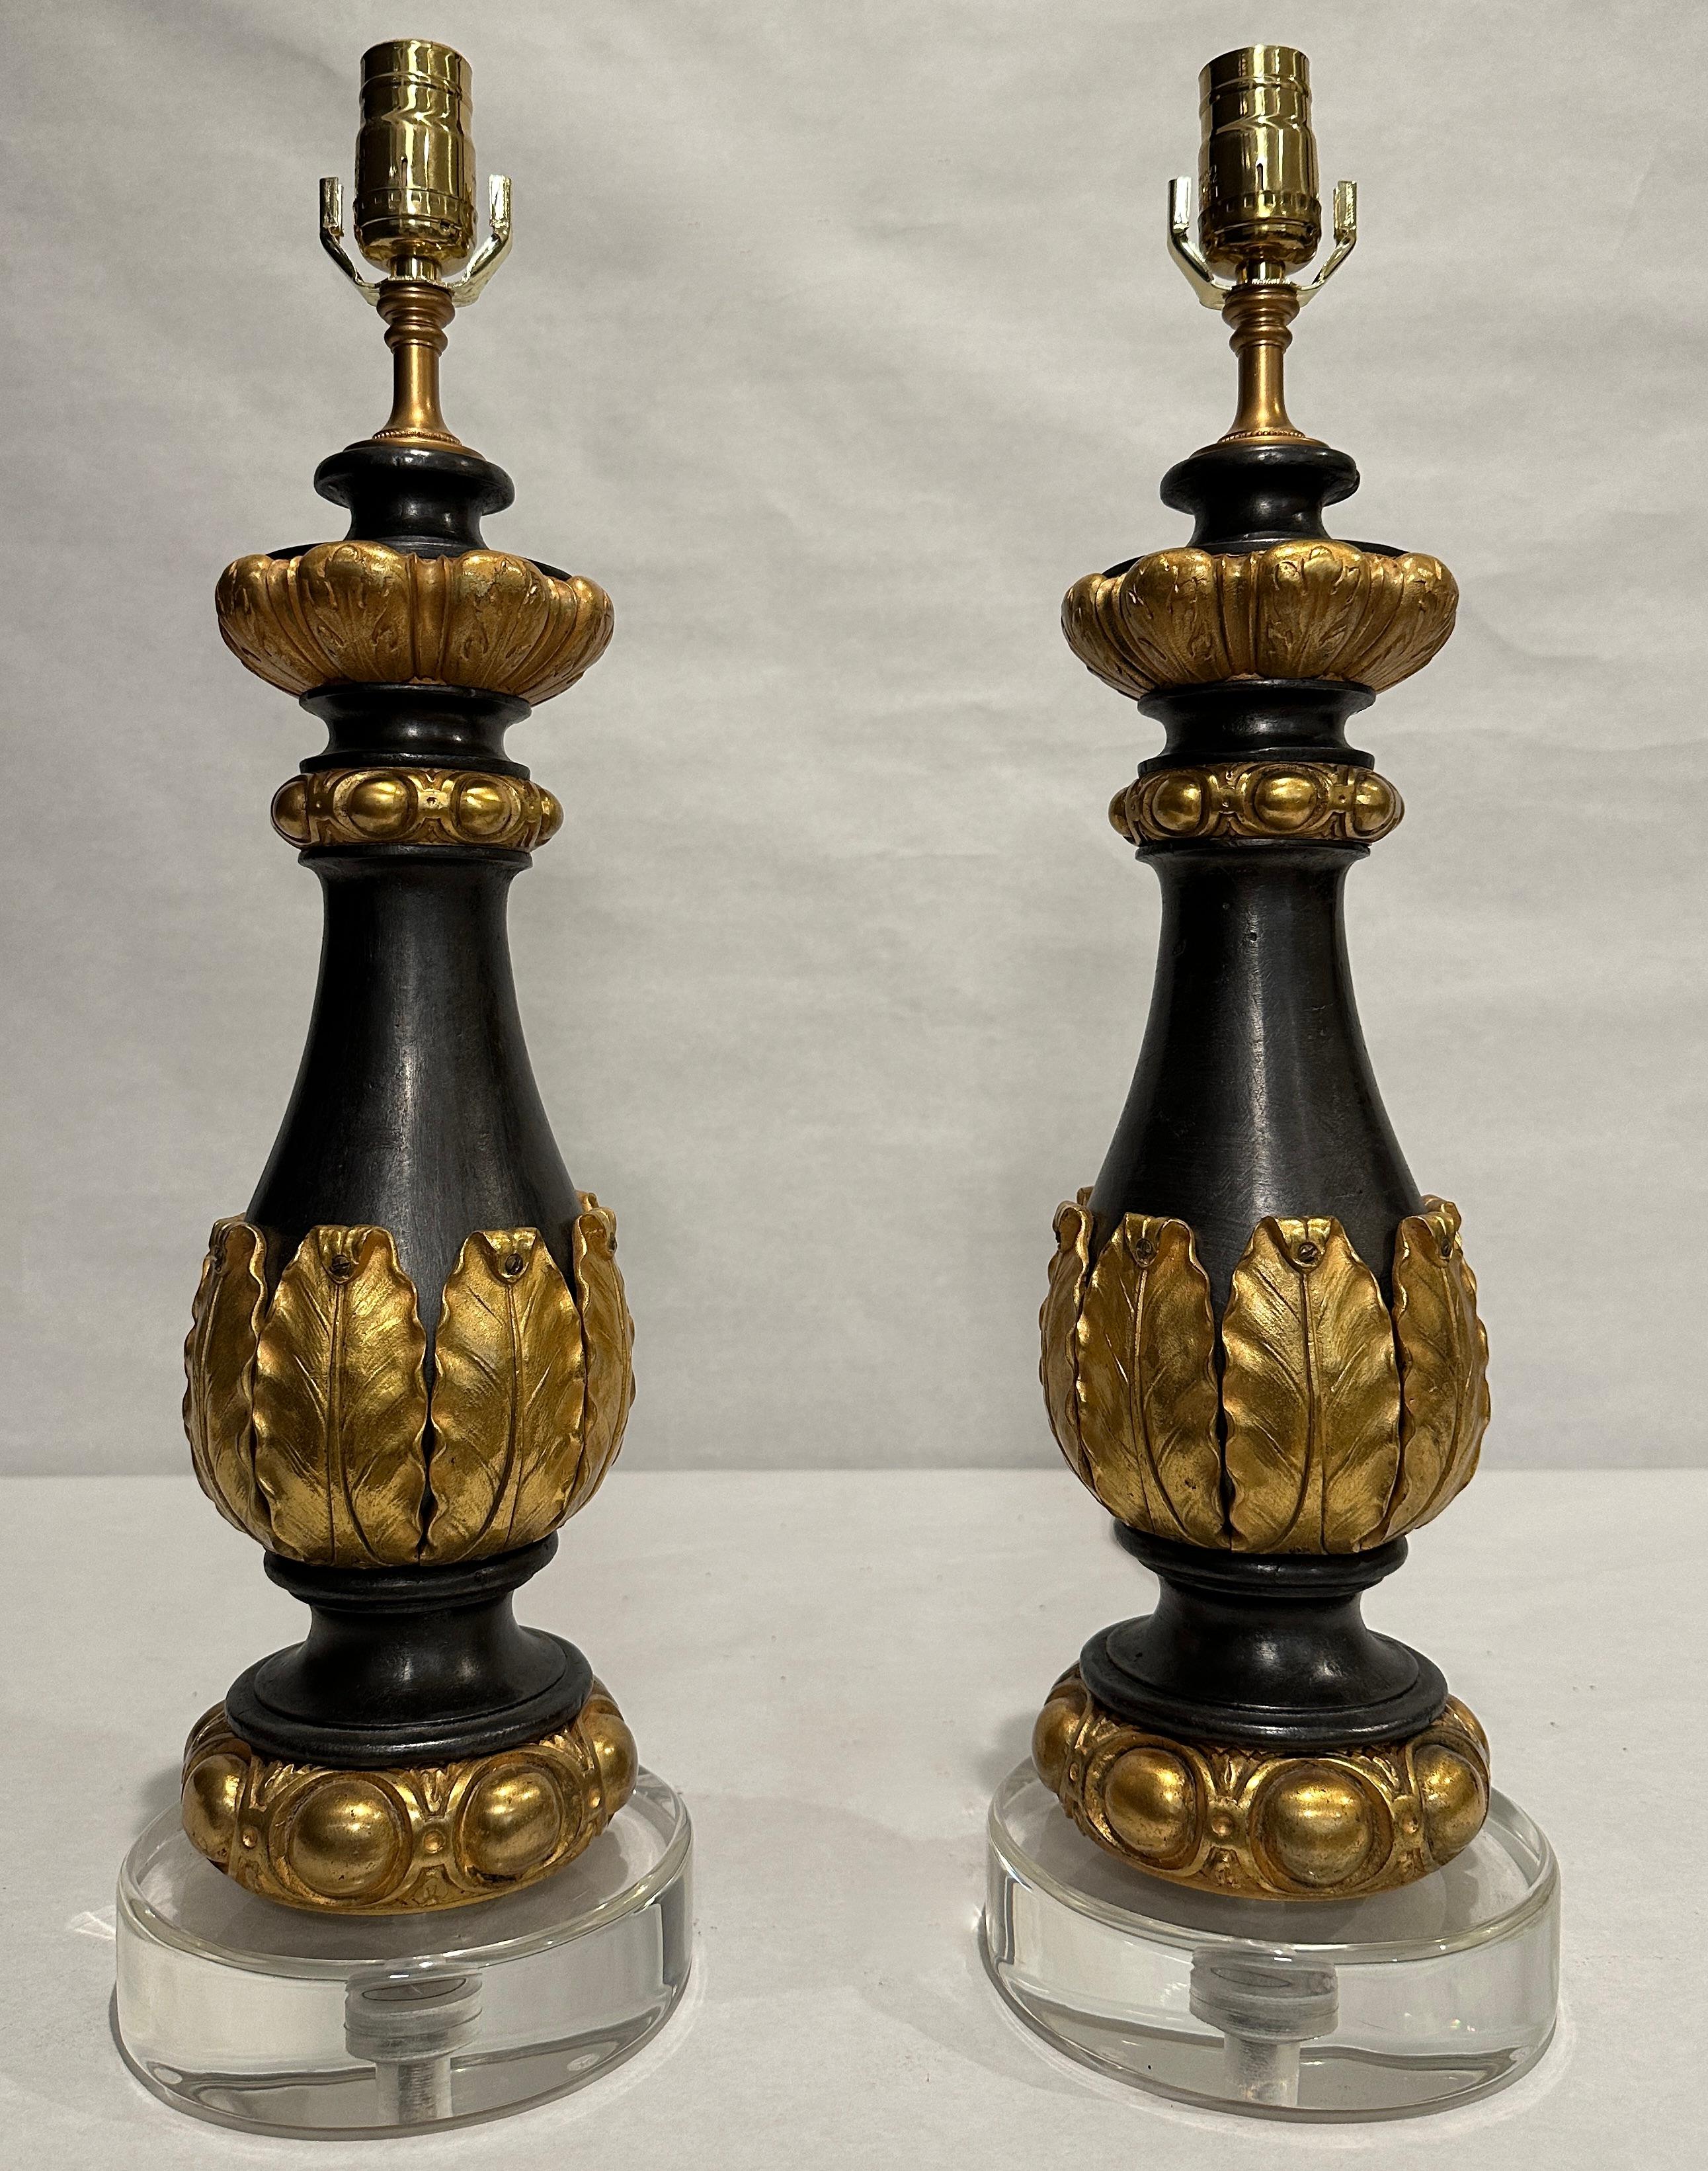 Pair of 19th century patinated iron and gilt bronze garnitures as lamps on round lucite bases. Vase from body surrounded by gilt bronze leaves. Egg and dart form collars top and bottom.